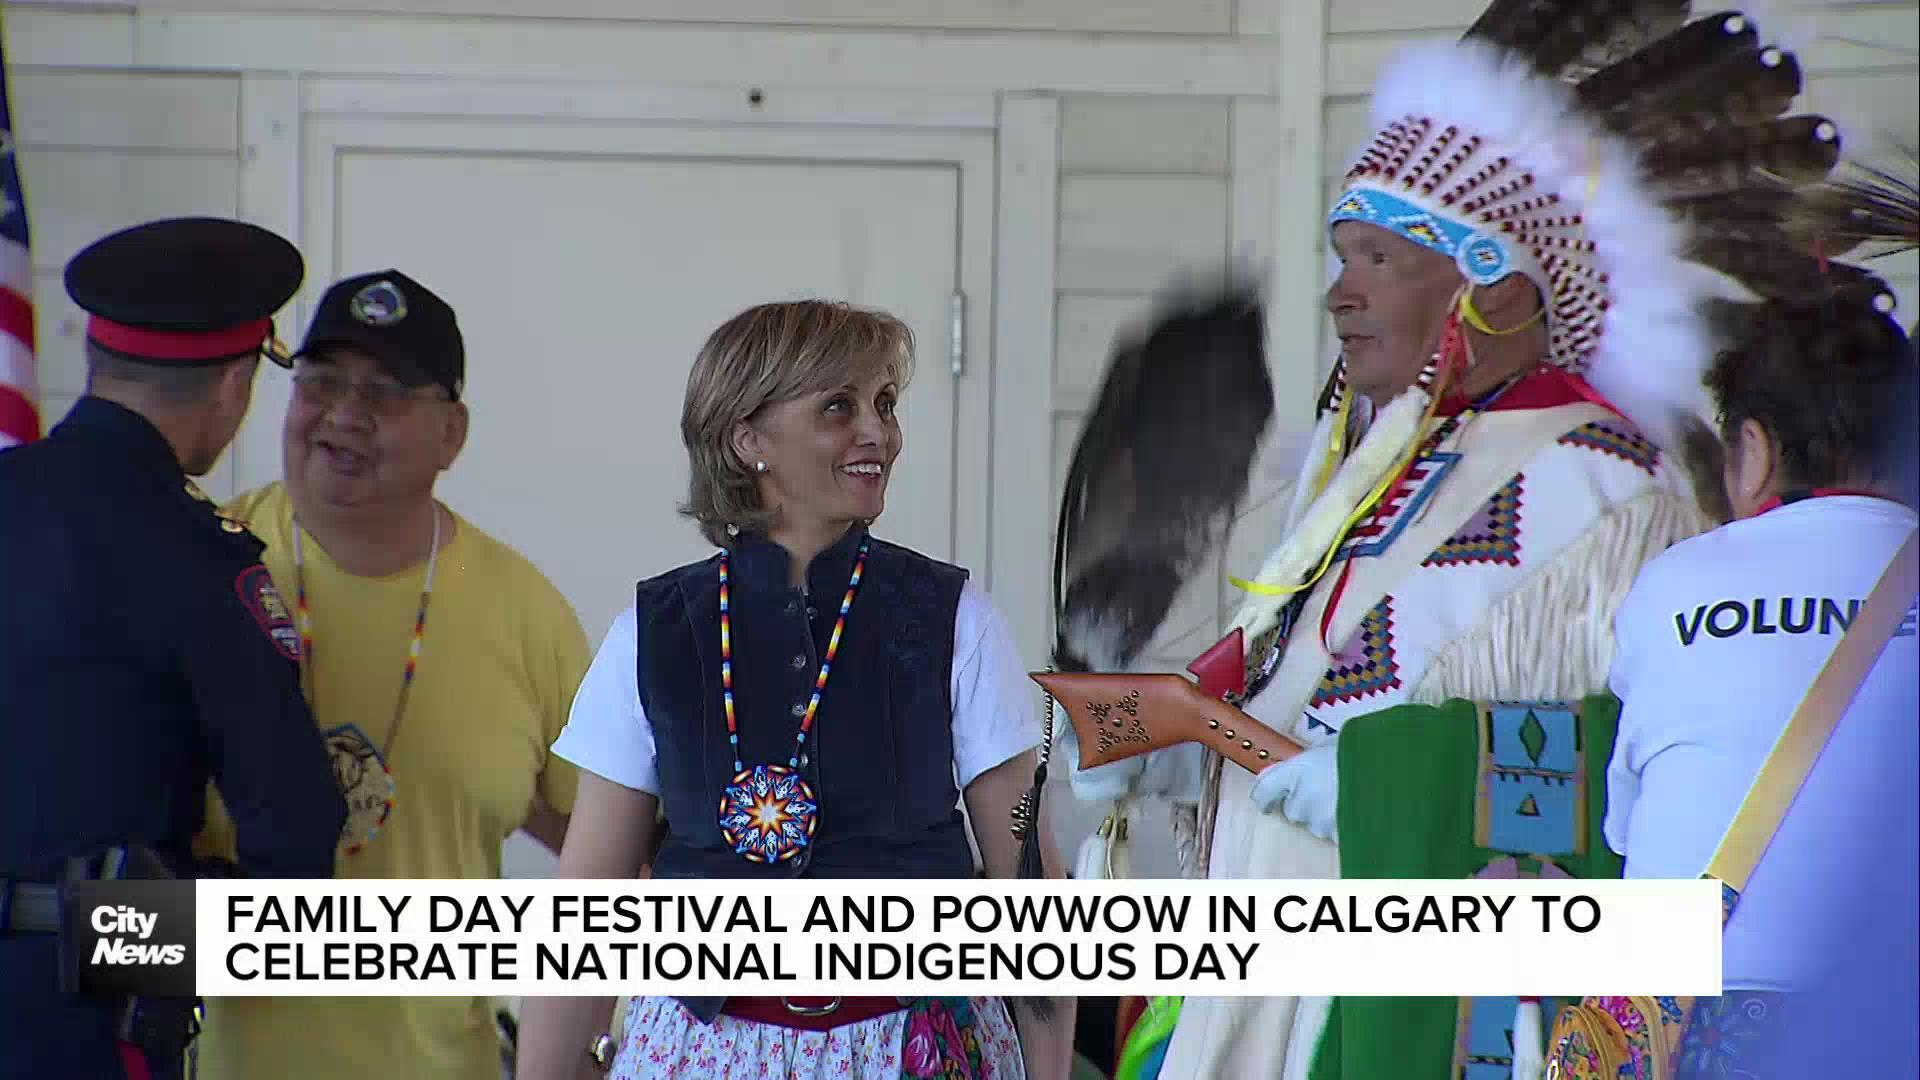 Family Day festival and powwow in Calgary to celebrate National Indigenous Day